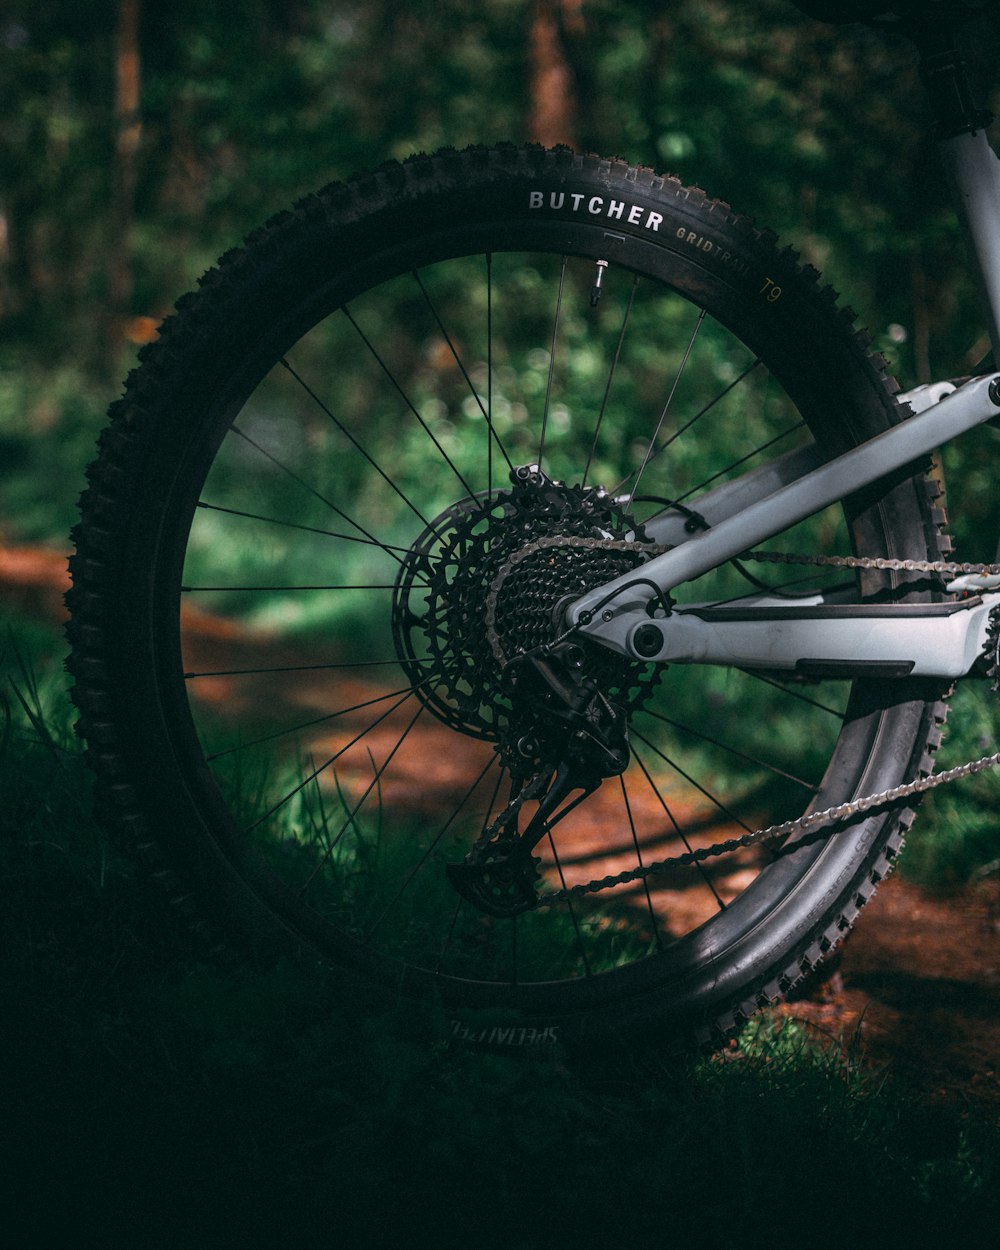 a close up of a bike tire on a trail